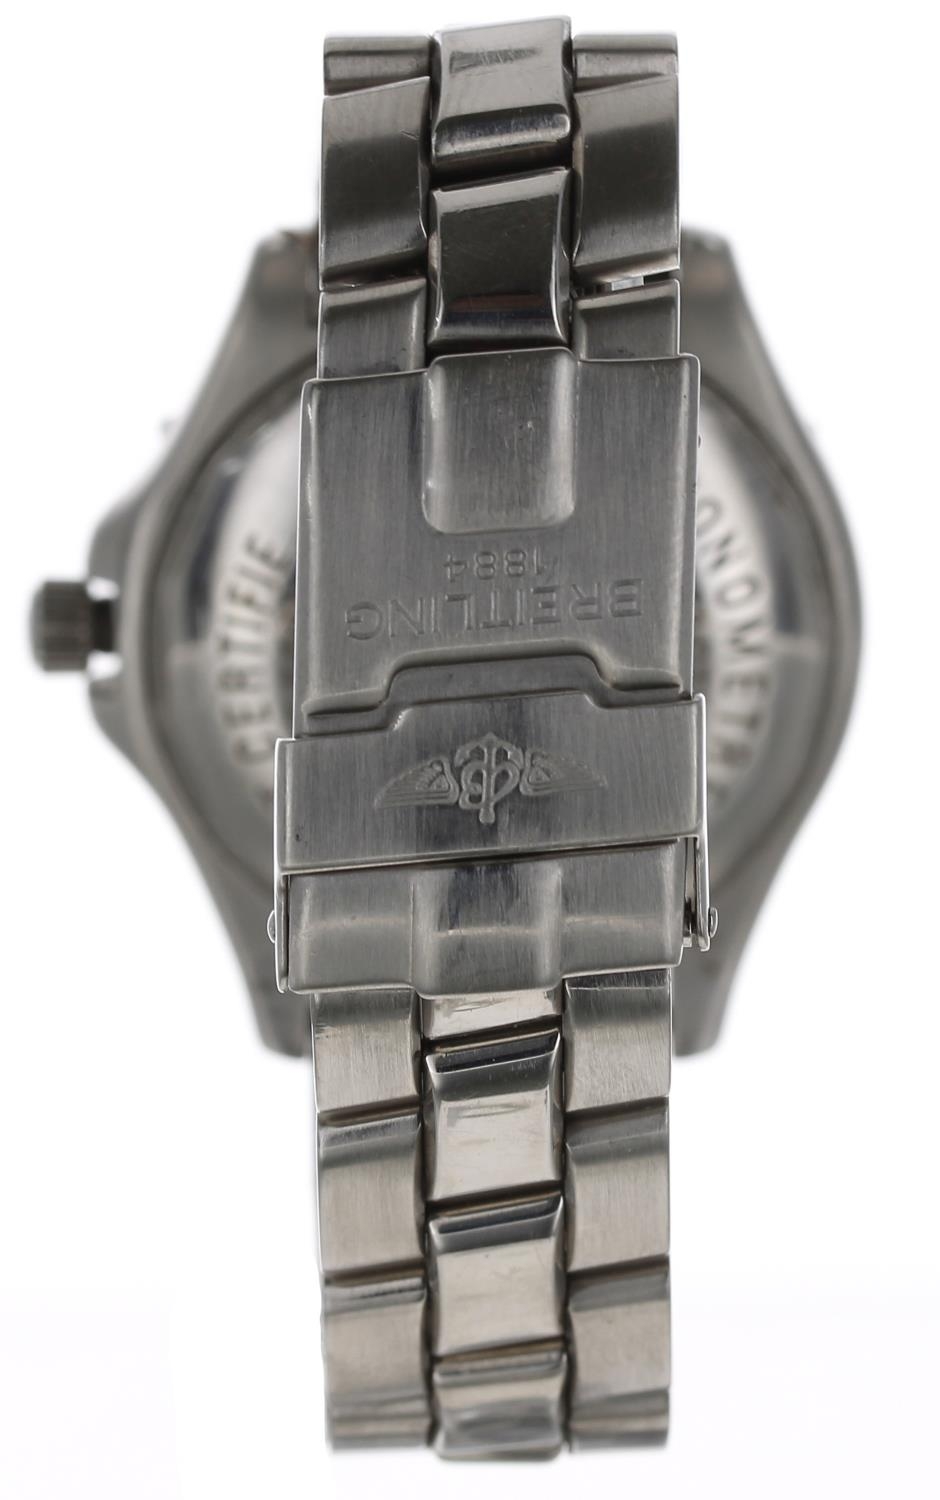 Breitling Colt Ocean stainless steel gentleman's wristwatch, reference no. A64350, serial no. - Image 4 of 5